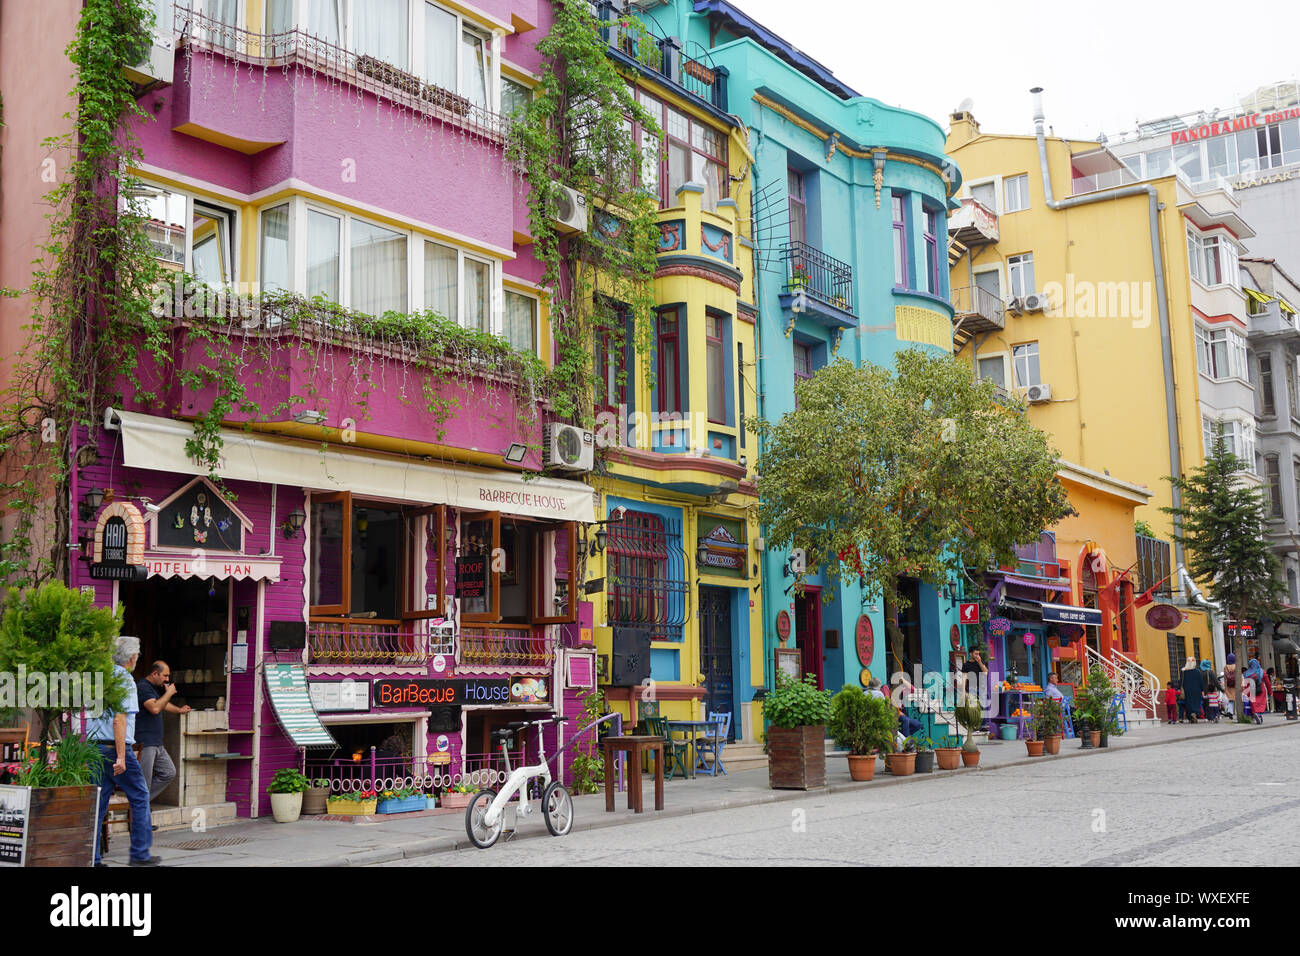 tourists and locals in the colorful Golden Horn neighborhood in Istanbul with shops and restaurants Stock Photo